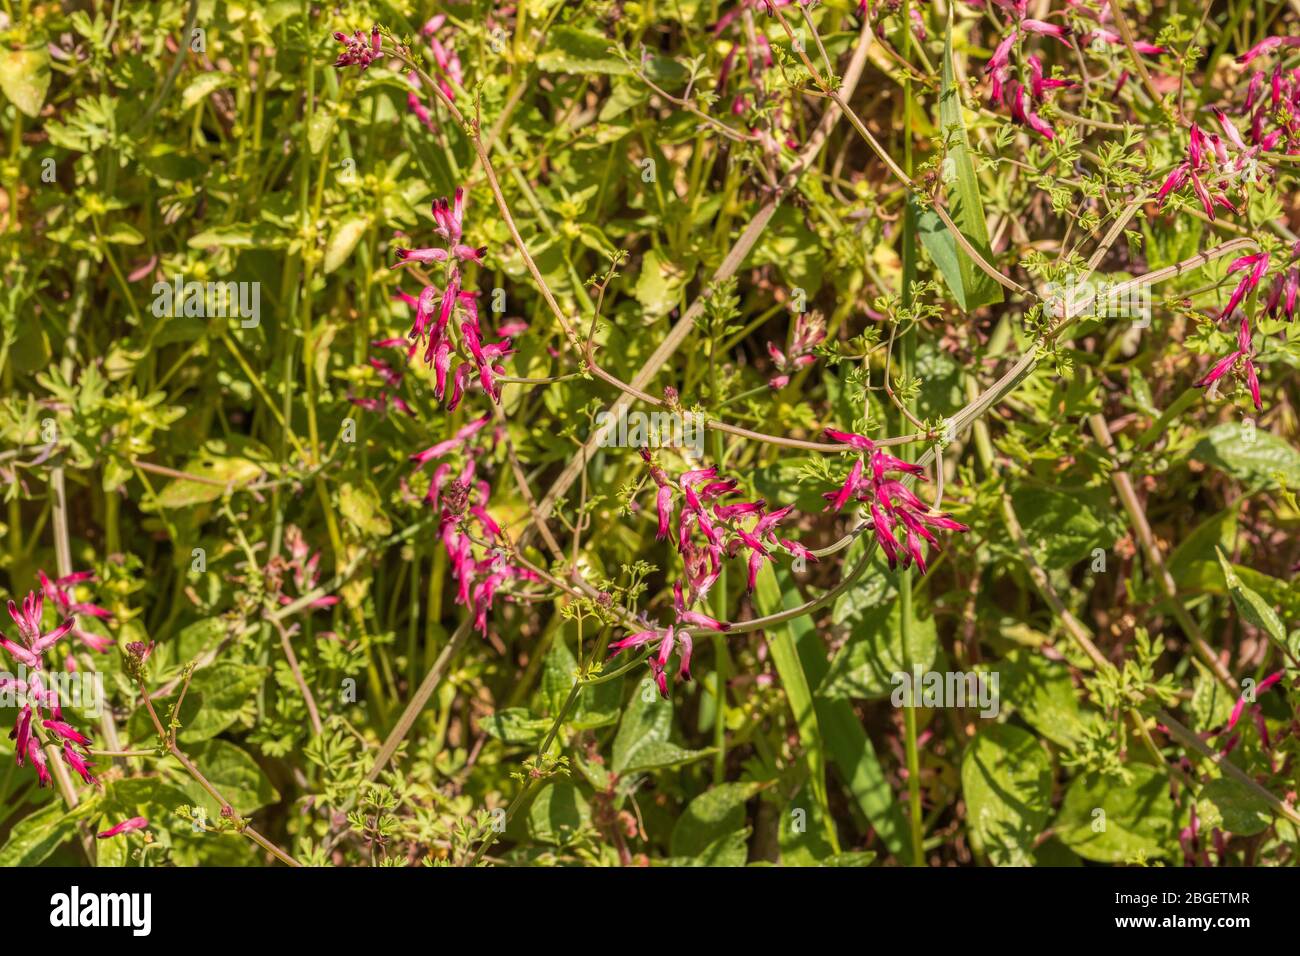 Fumaria sp. Fumitory Plant in Flower Stock Photo